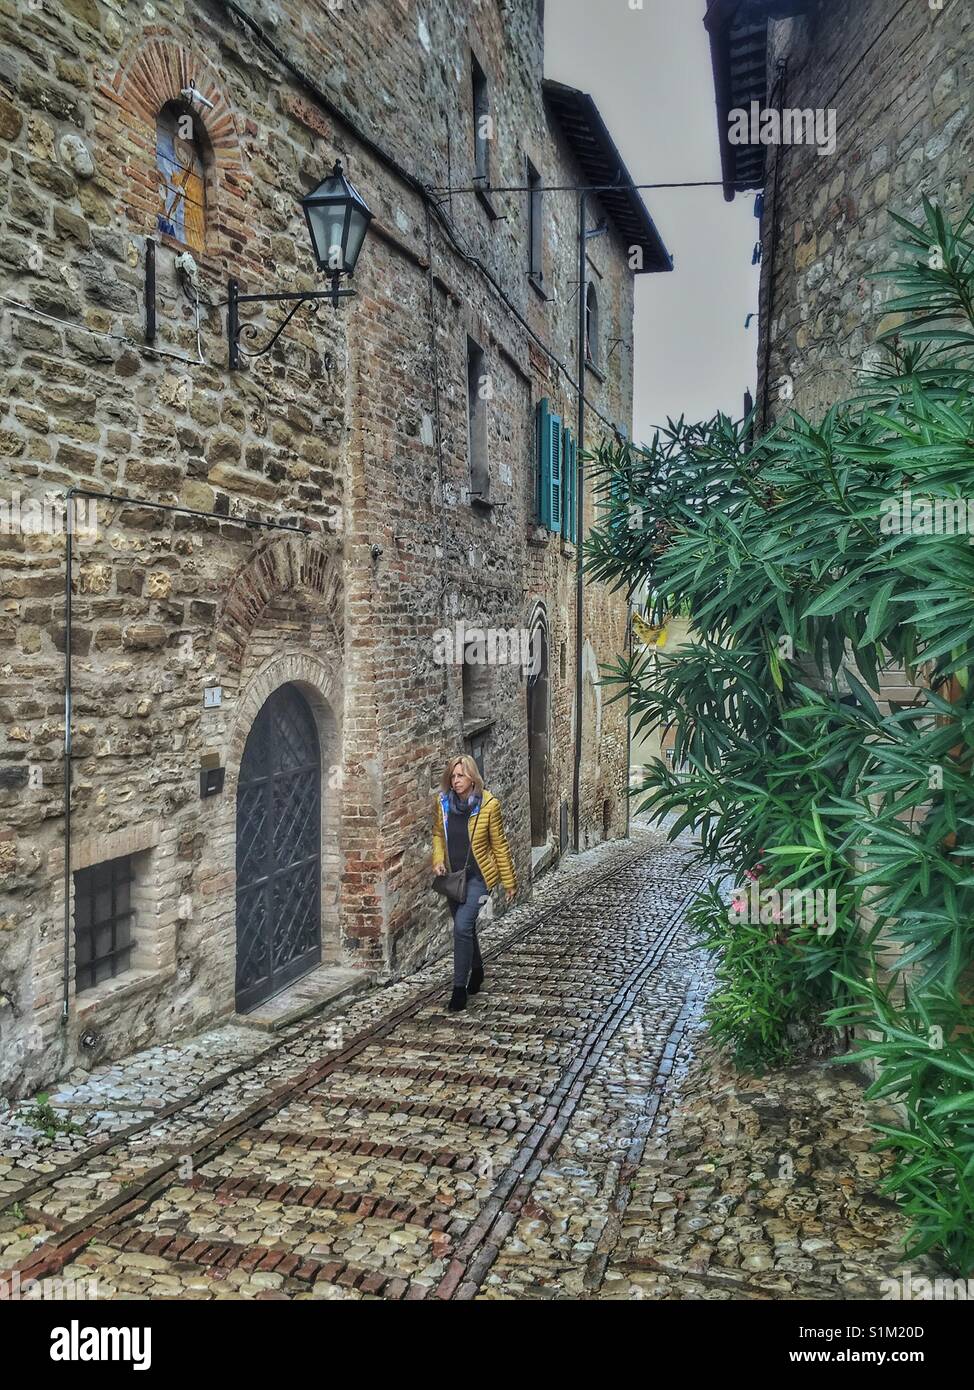 Woman walking down a cobblestone road in Umbria, Italy. Stock Photo